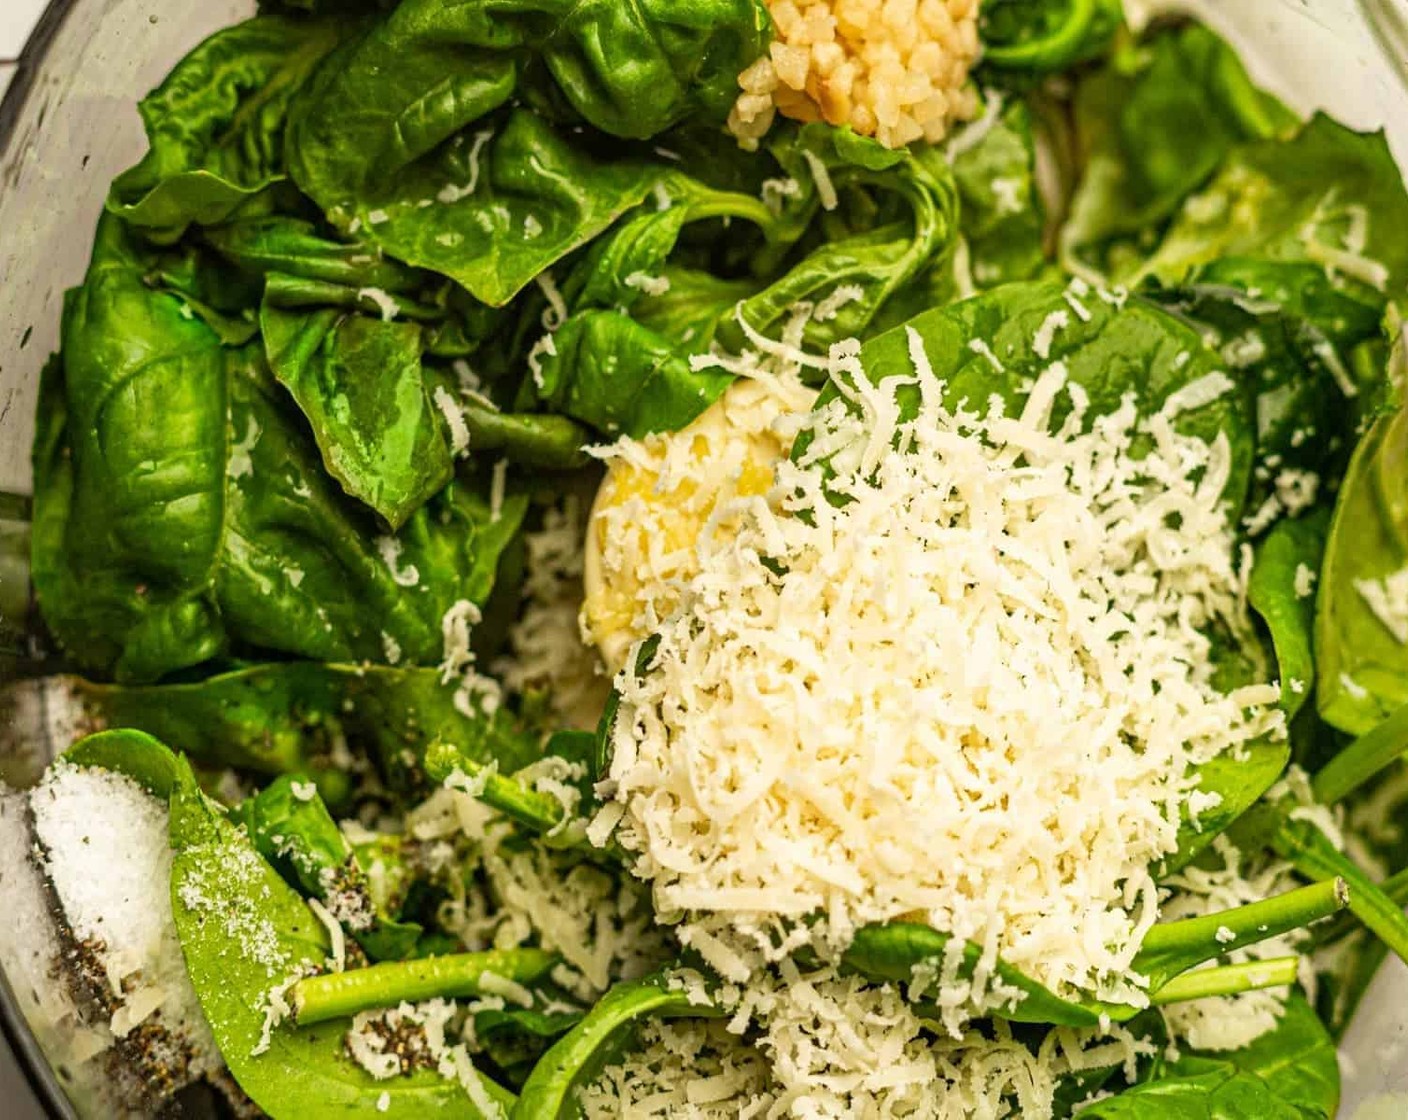 step 1 Add Fresh Basil (1 cup), Fresh Spinach (1 cup), Parmesan Cheese (1/4 cup), Extra-Virgin Olive Oil (1/2 cup), Lemon (1/2), Garlic (2 cloves), Salt (to taste), and Ground Black Pepper (to taste) to a high-powered blender or food processor and pulse until the mixture is smooth.